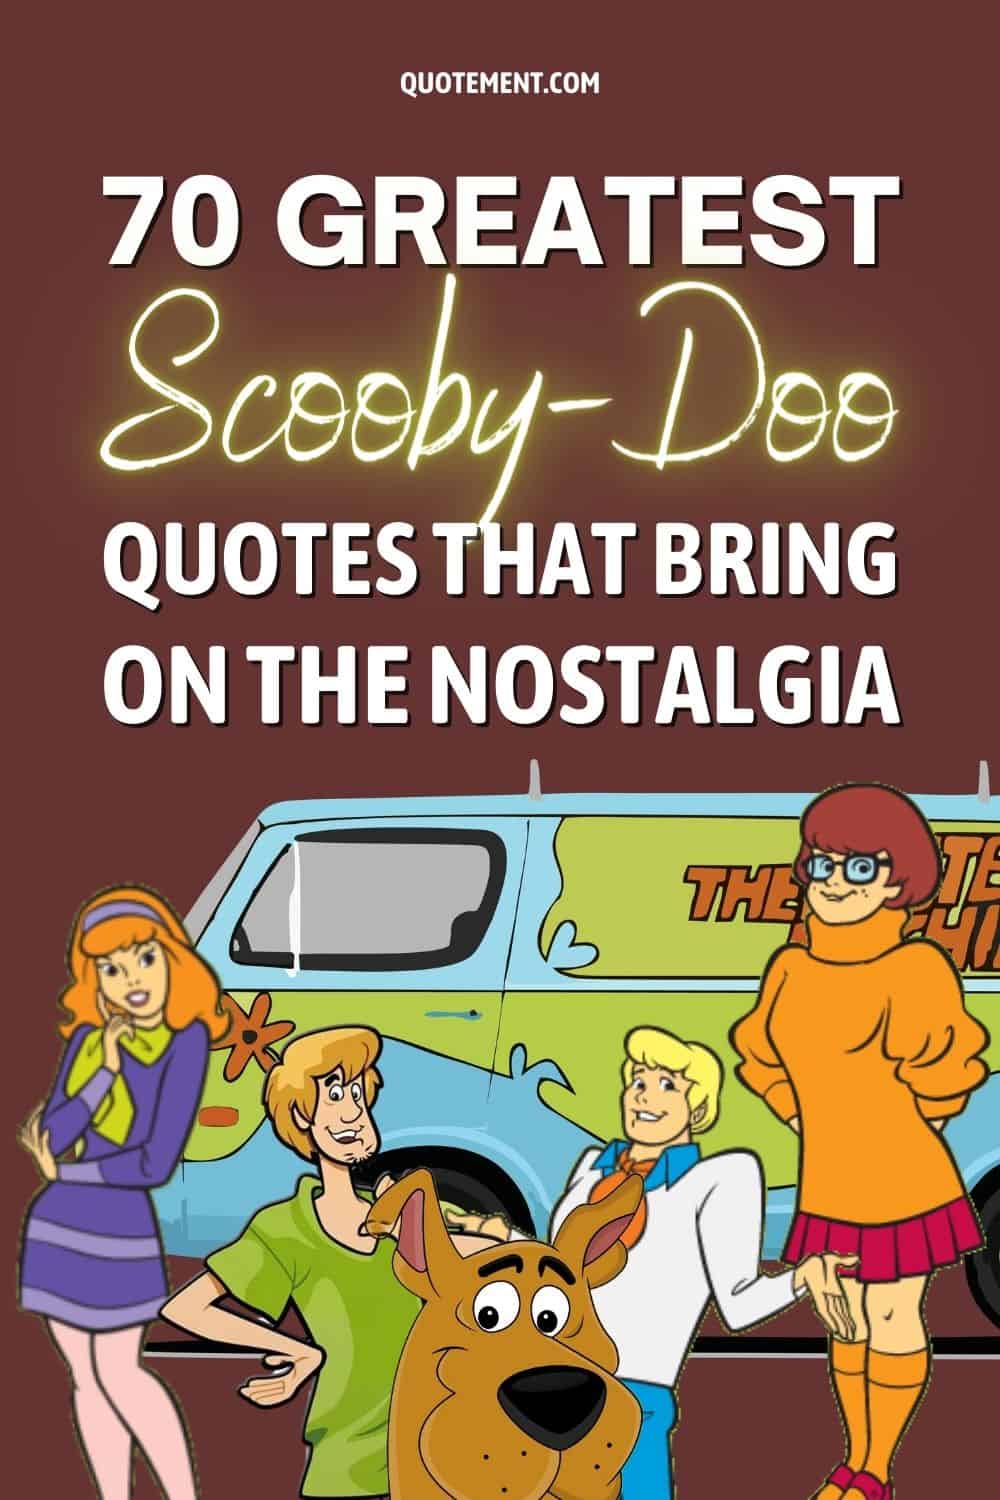 70 Greatest Scooby-Doo Quotes That Bring On The Nostalgia
